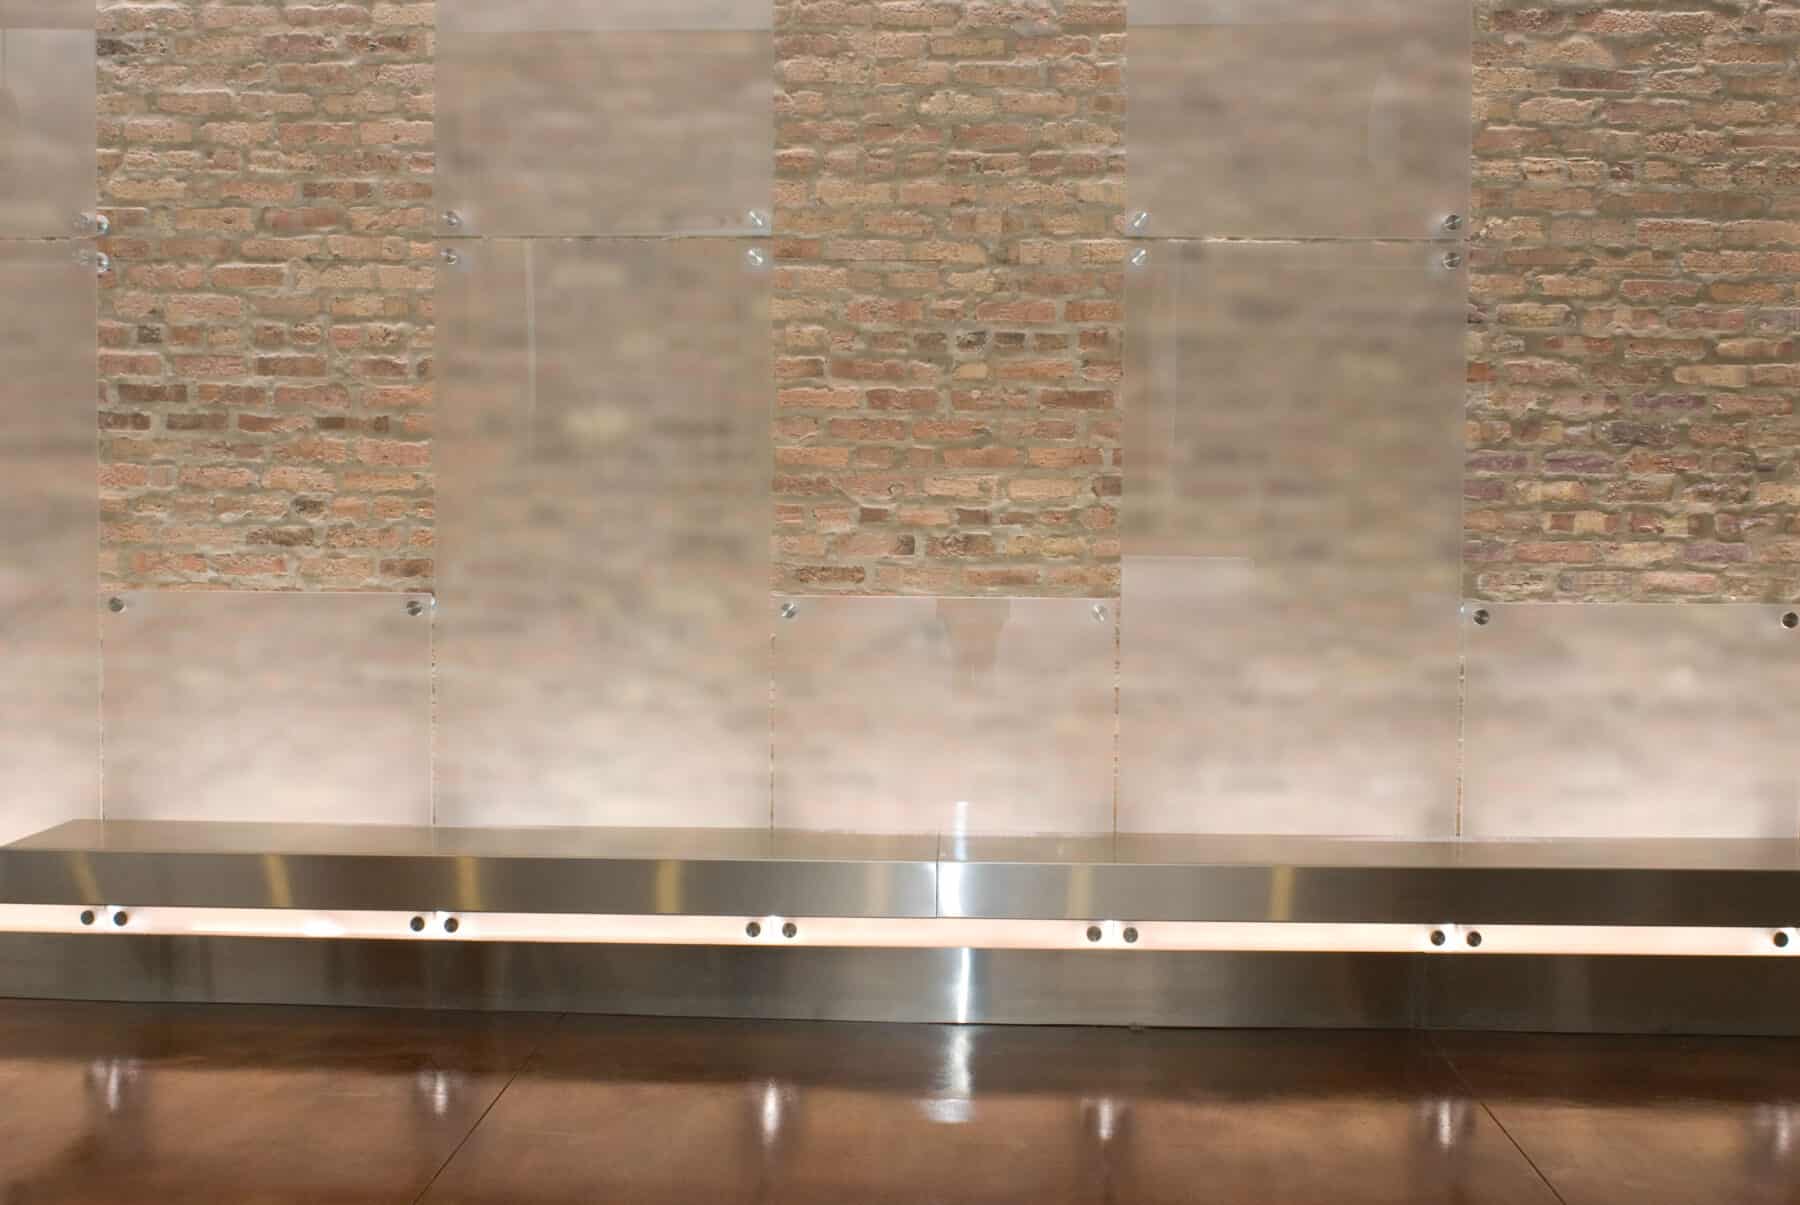 Custom Etched Glass Wall Panels with Metal Floating Bench on Brick Wall for West Jackson Lobby Remodel by Commercial Builder & General Contractor Structural Enterprises